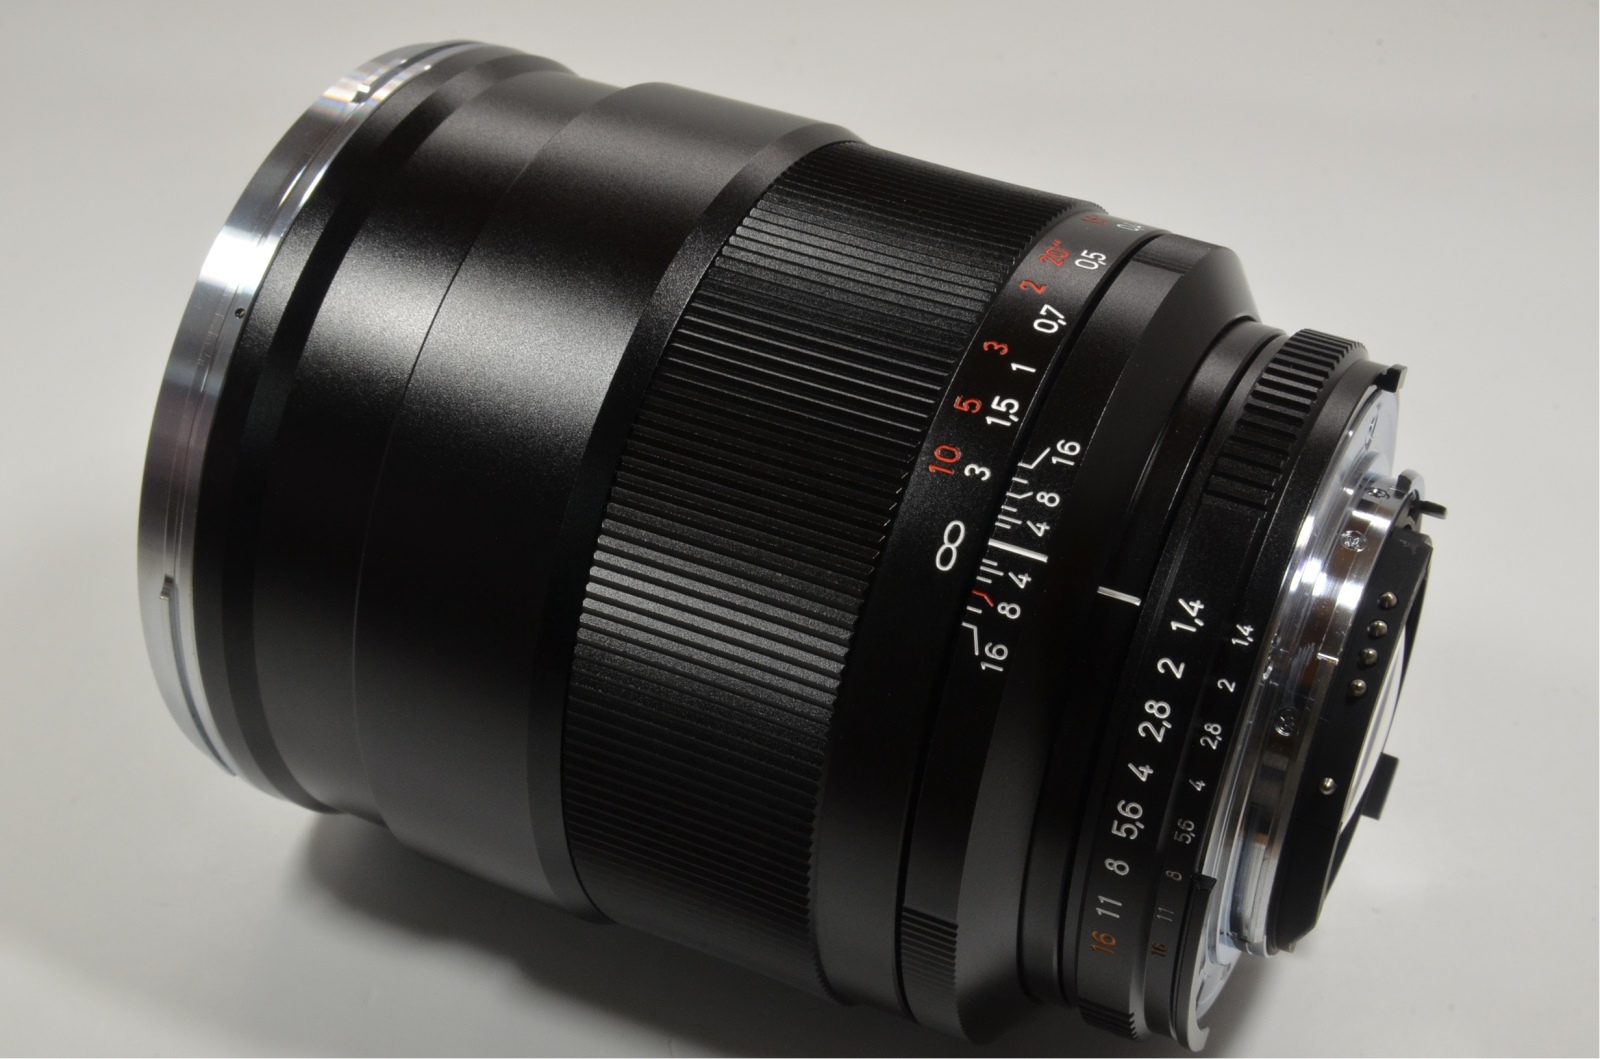 carl zeiss distagon t* 35mm f1.4 zf.2 for nikon with lens filter